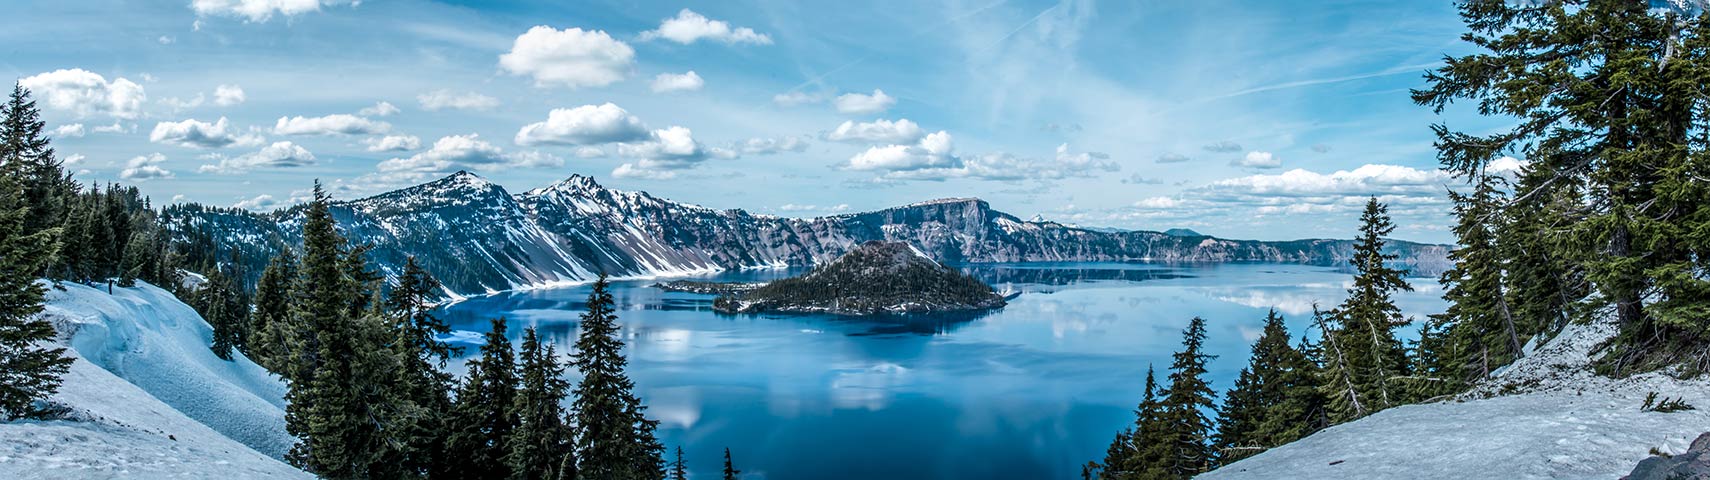 Crater Lake and Wizard Island, Oregon